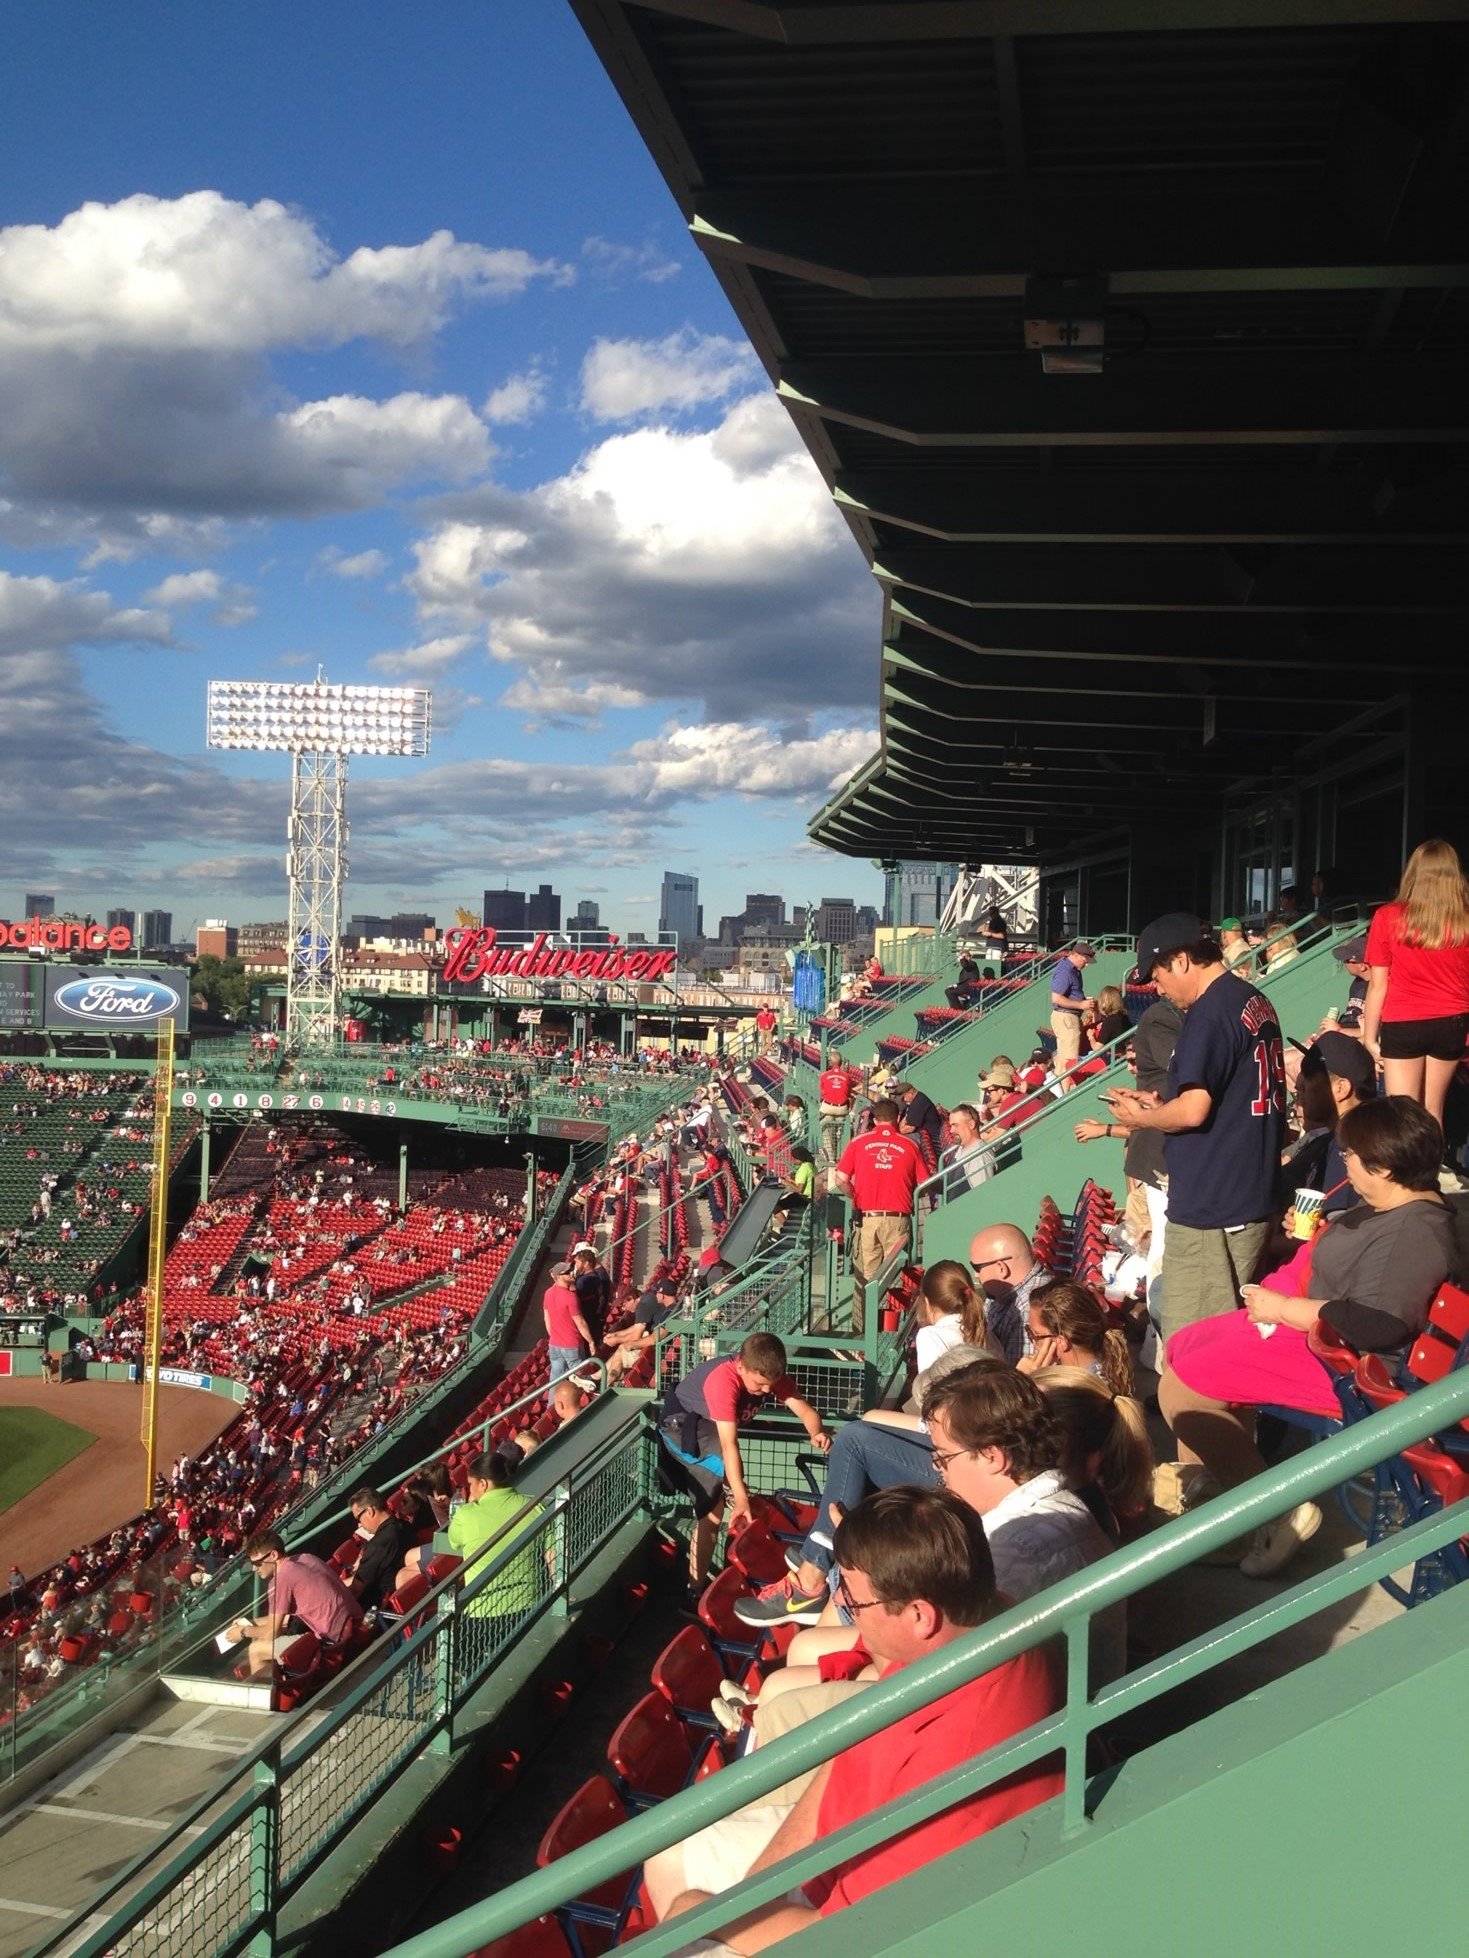 What is the best seating location for a concert in Fenway Park